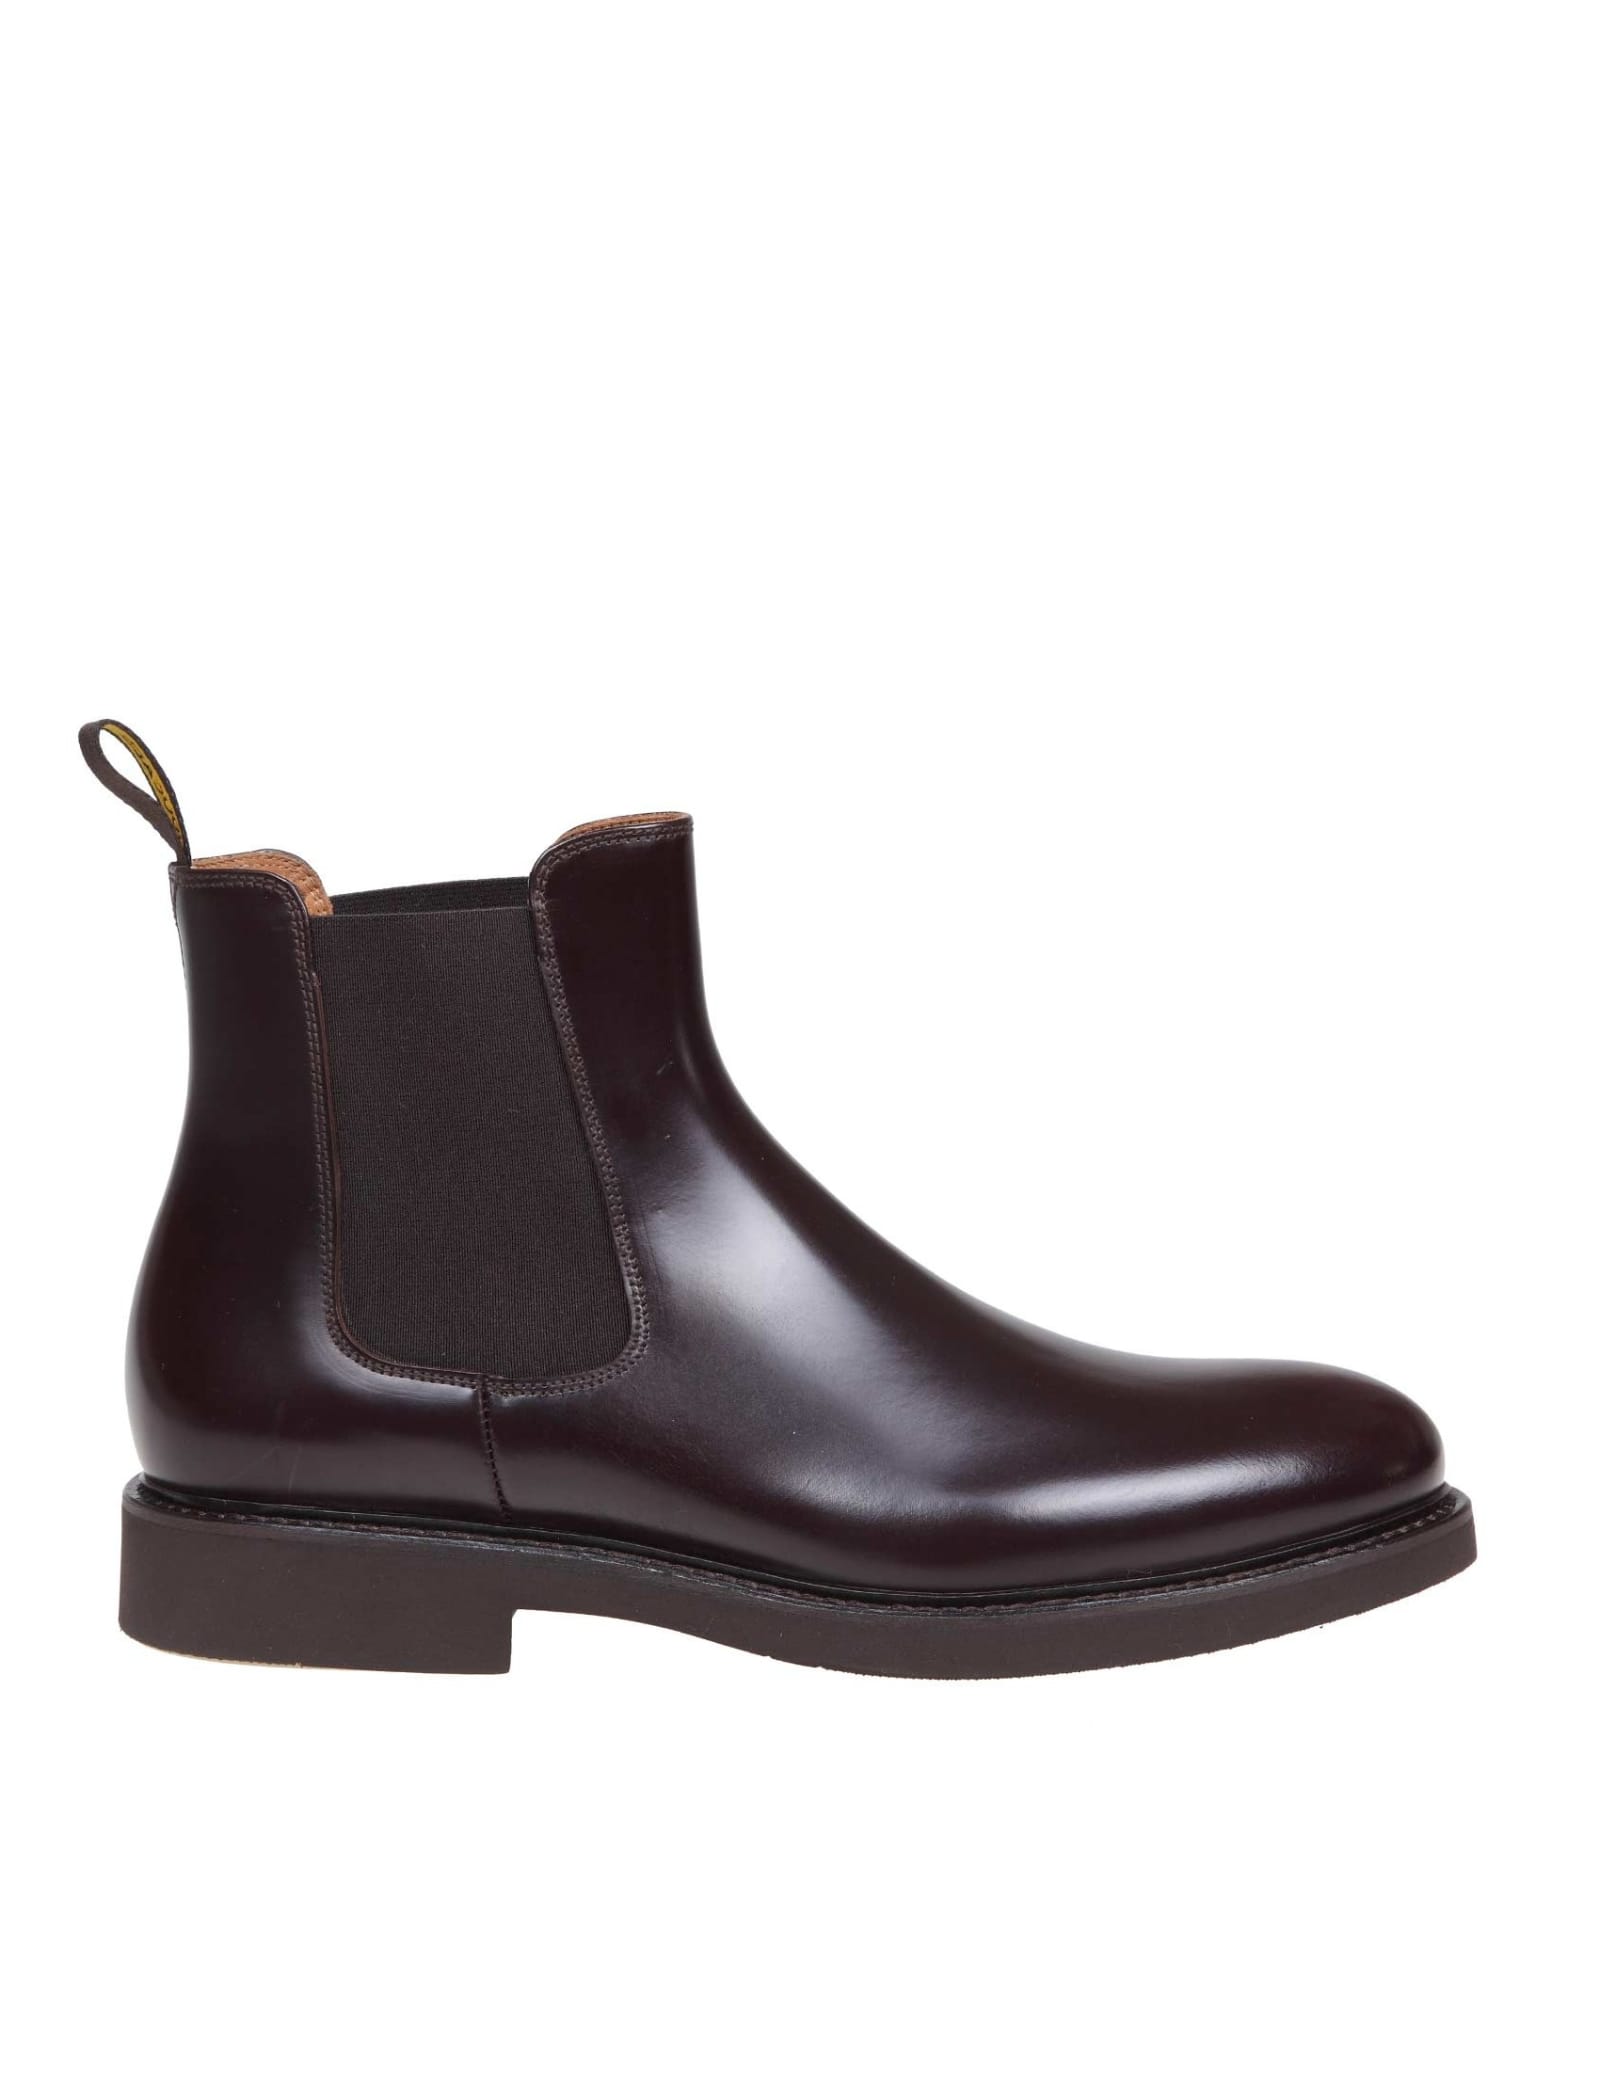 Doucals Boots In Bordeaux Leather